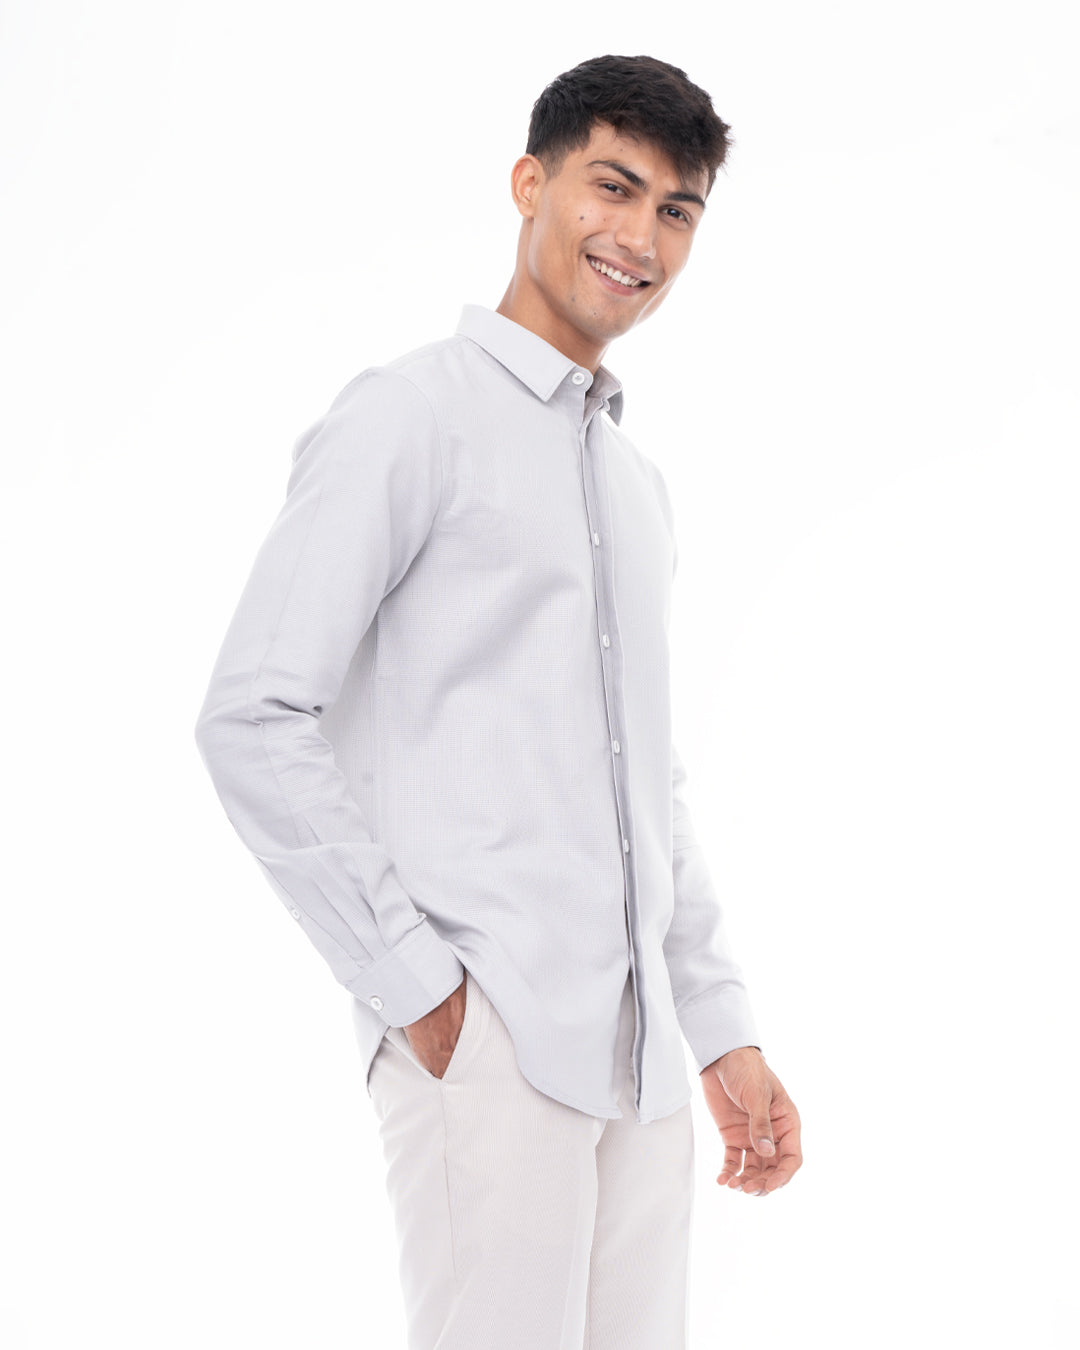 A man with short dark hair smiles at the camera. He is wearing a light gray, long-sleeved, Ash Grey - Classic Shirt and white pants. With one hand in his pocket, he stands against a plain white background, showcasing perfect everyday wear.